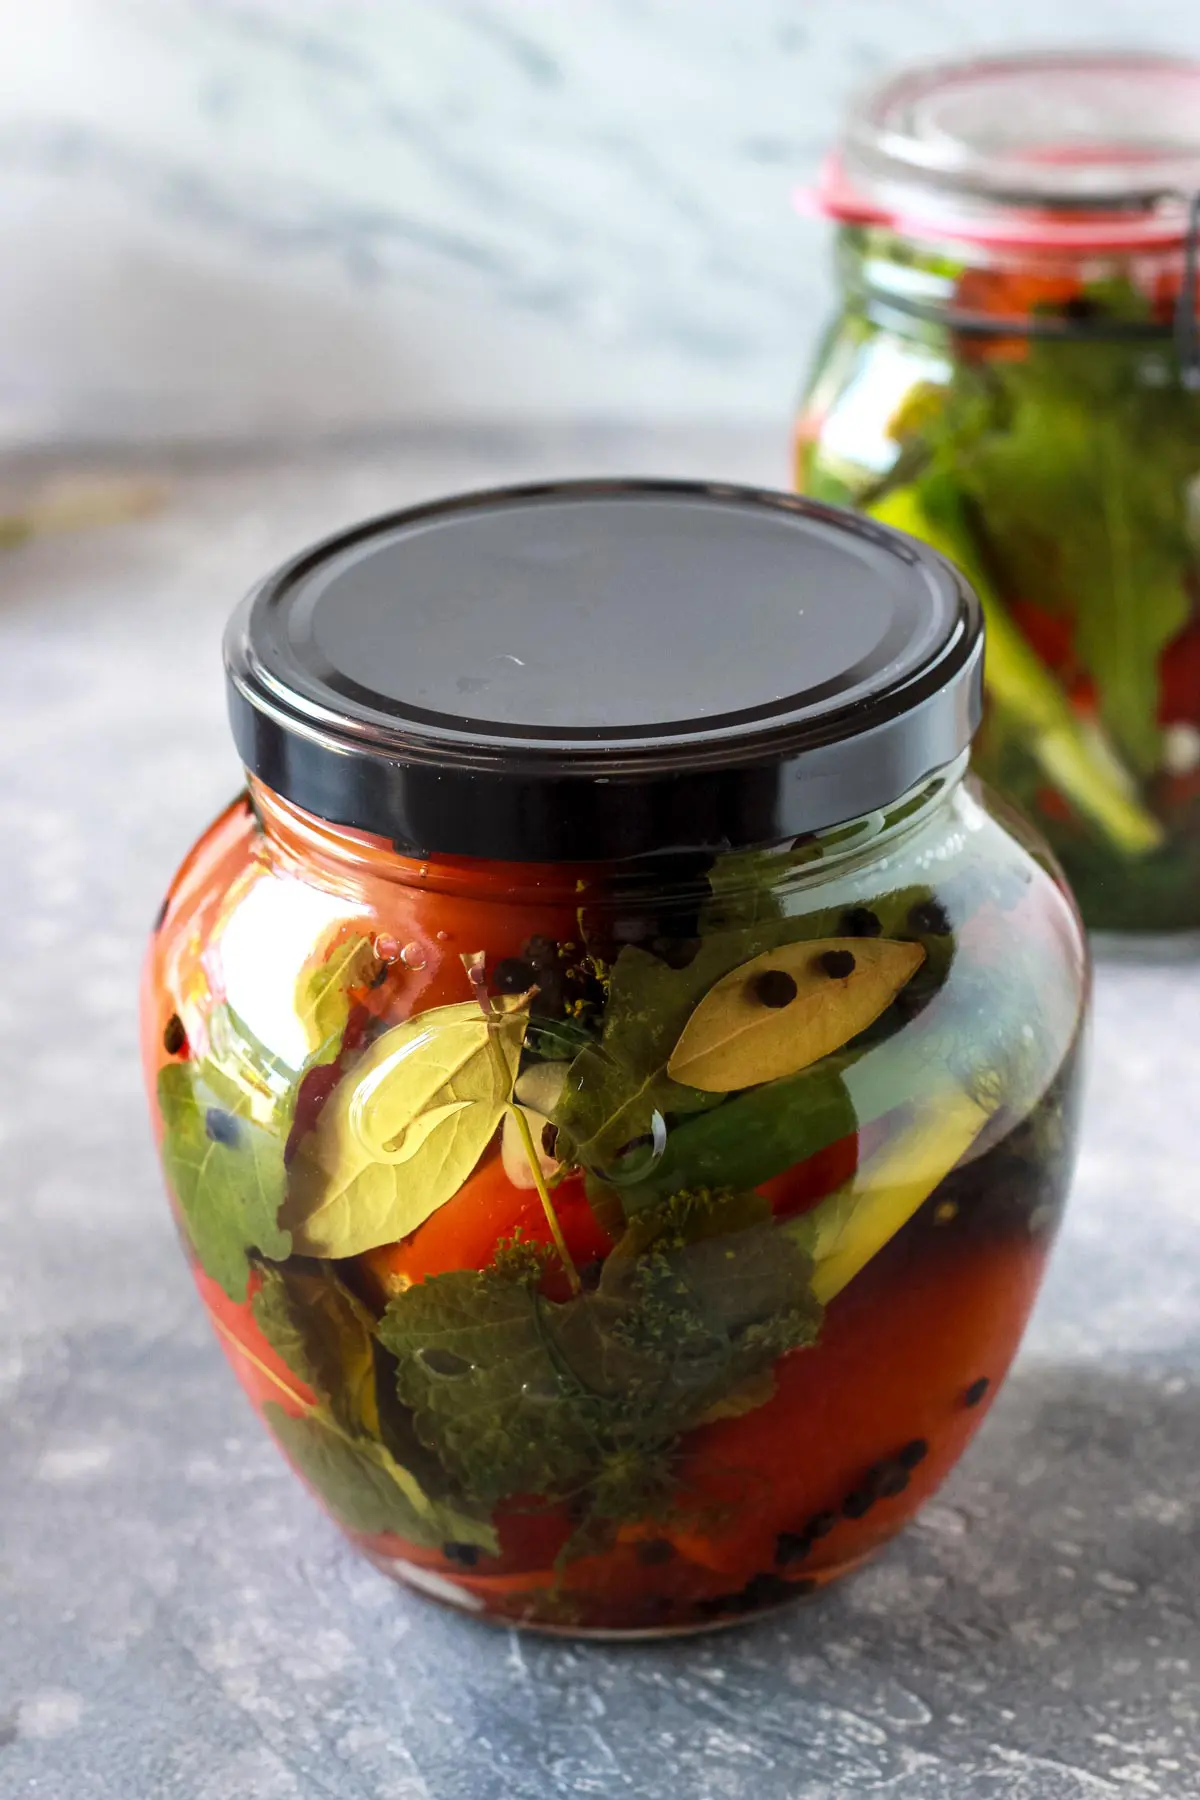 A sealed jar with pickled tomatoes.